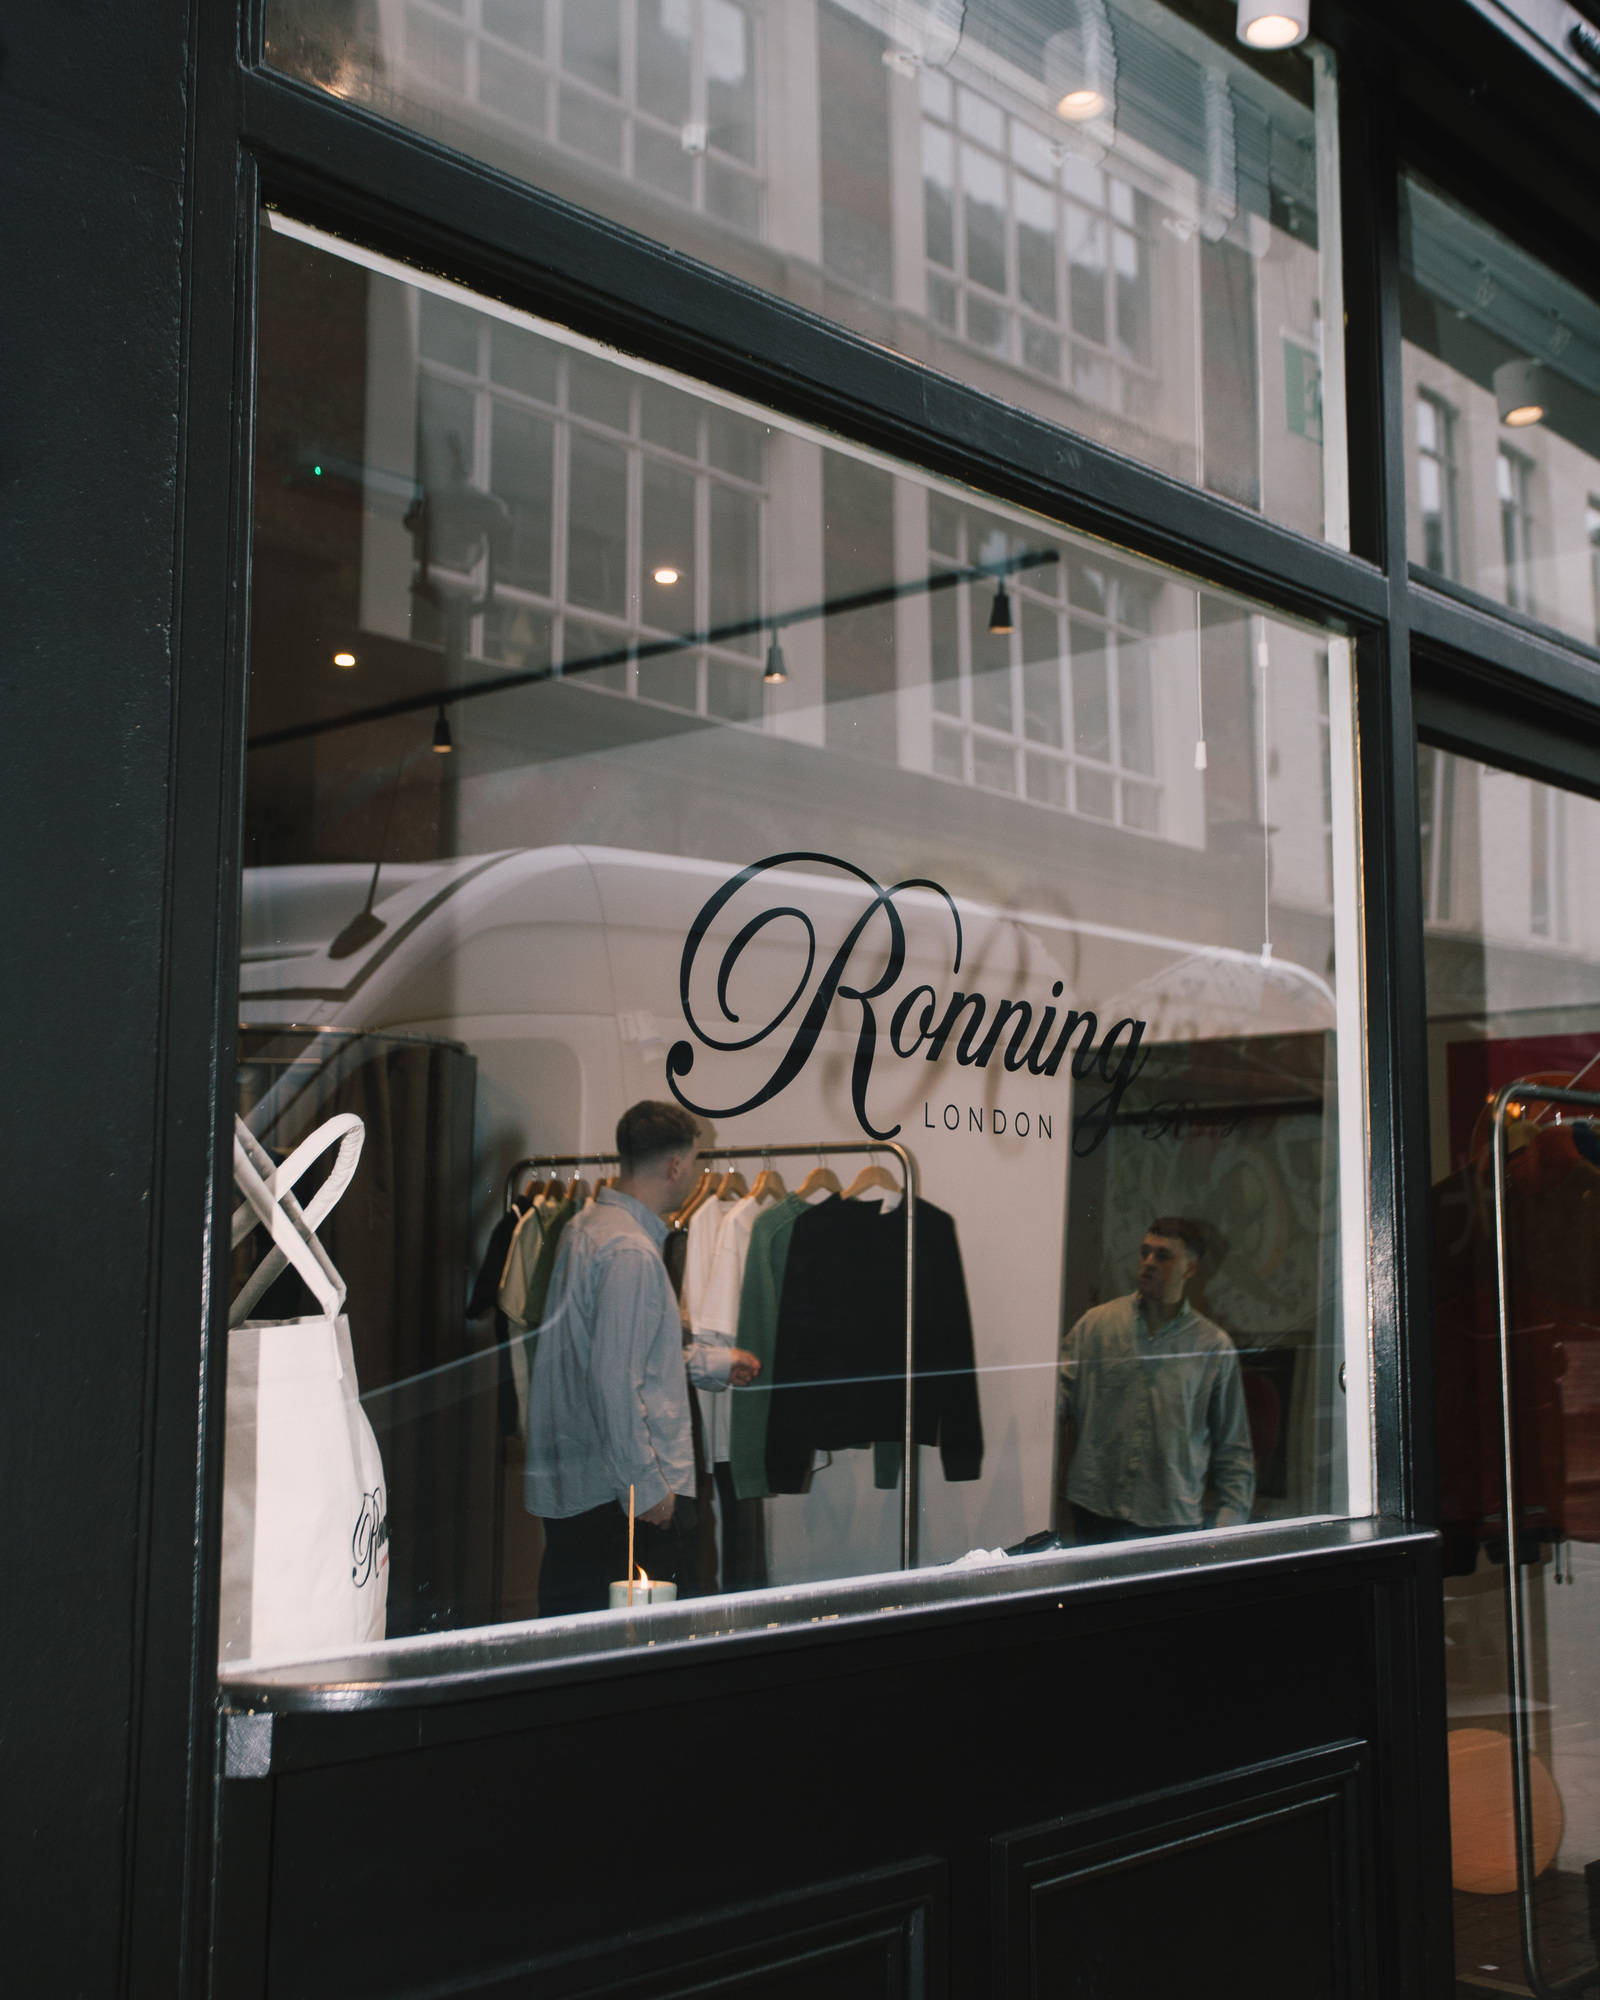 Founded in 2017 by Magnus Ronning, the London-based brand Ronning has amassed over 60,000 loyal Instagram followers with its contemporary menswear collections.